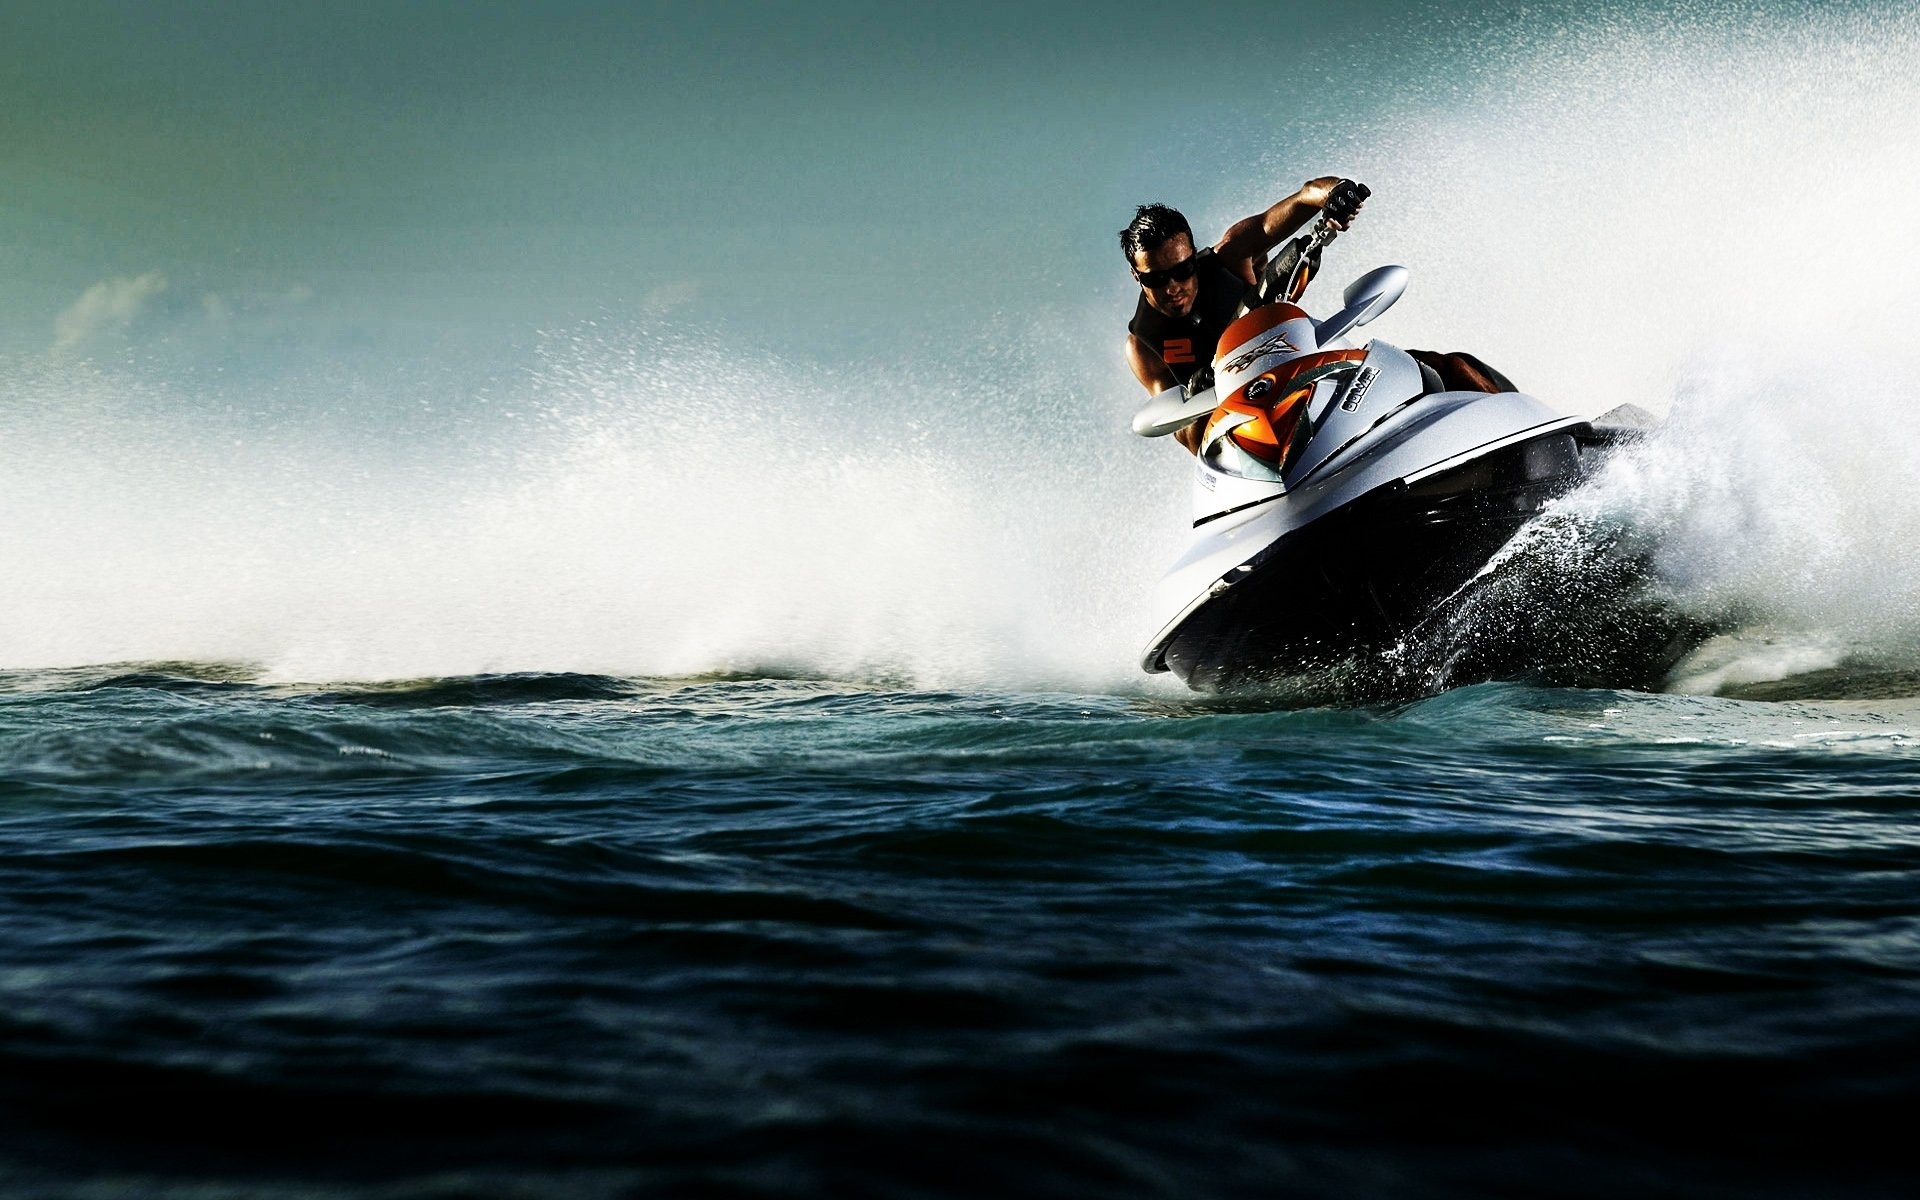 Jet ski adventures, HD wallpapers, Exciting water sports, Thrilling rides, 1920x1200 HD Desktop